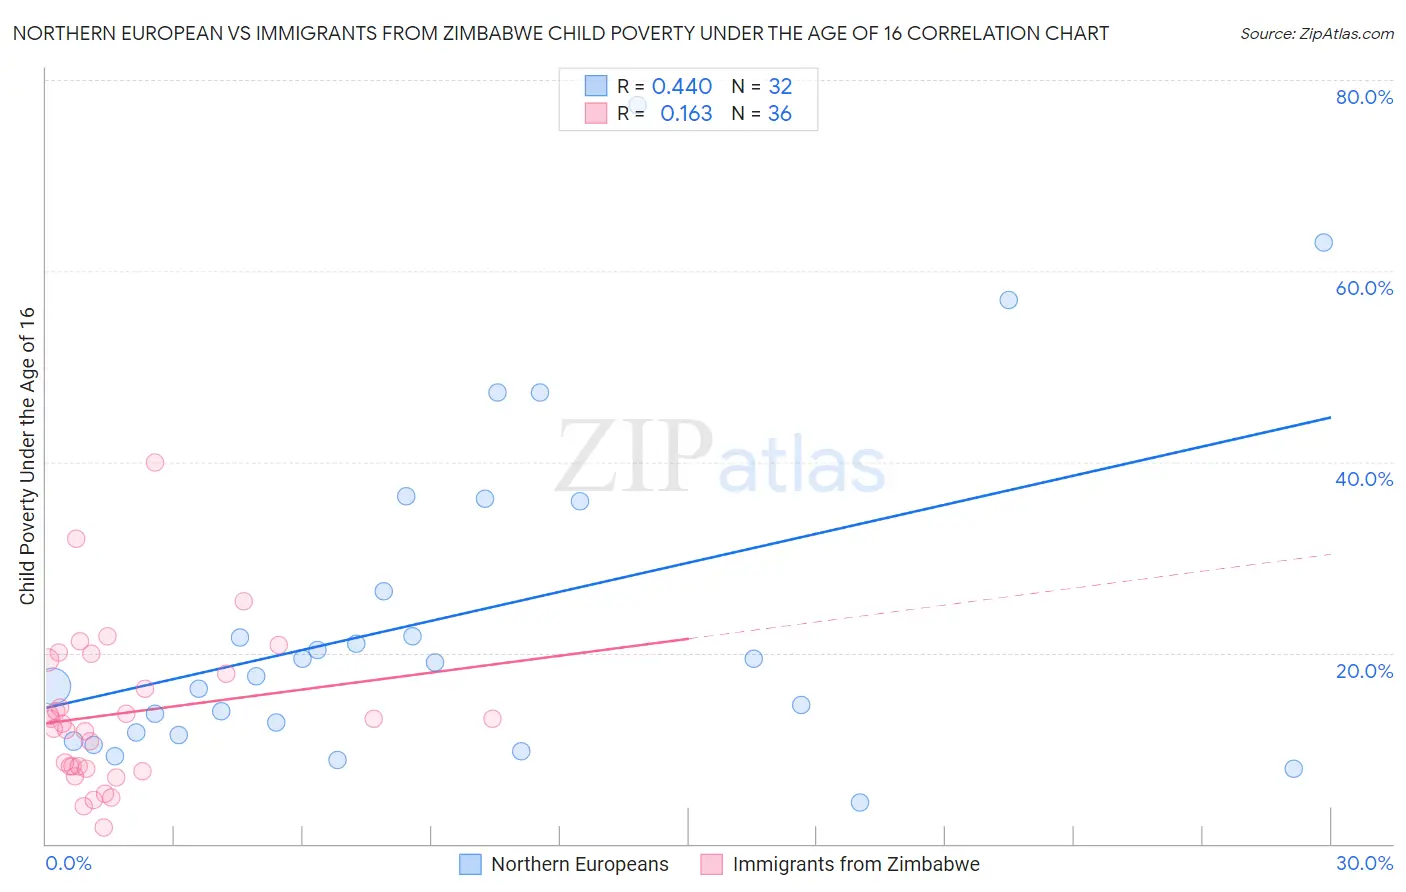 Northern European vs Immigrants from Zimbabwe Child Poverty Under the Age of 16